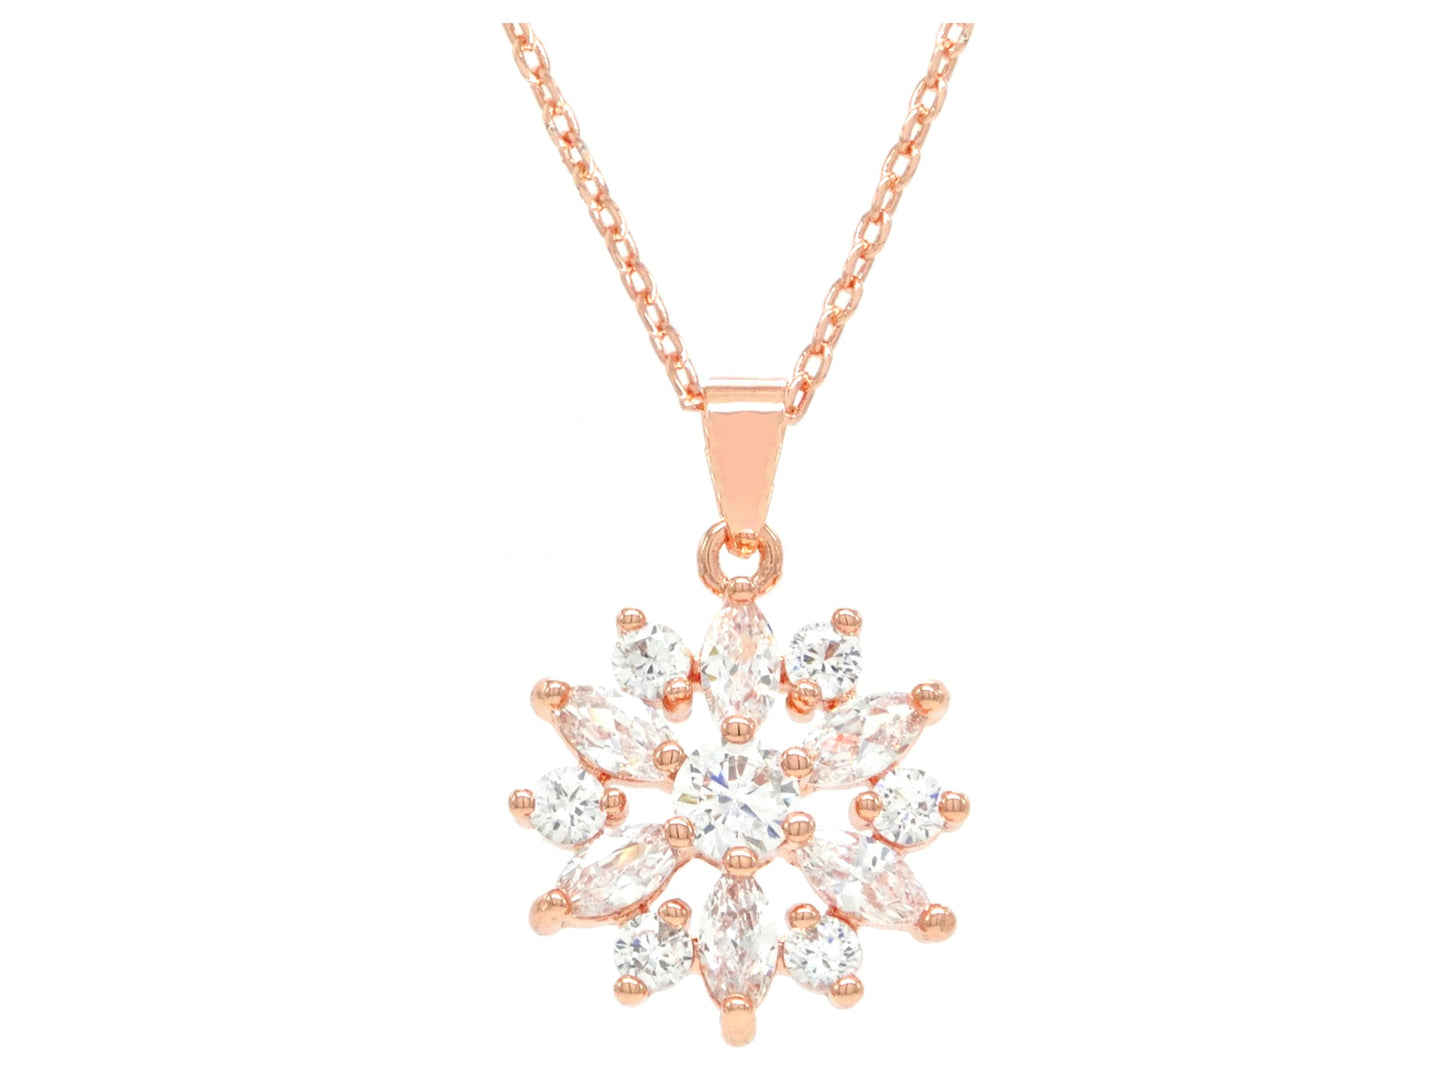 Rose gold sparkly white gems necklace MAIN